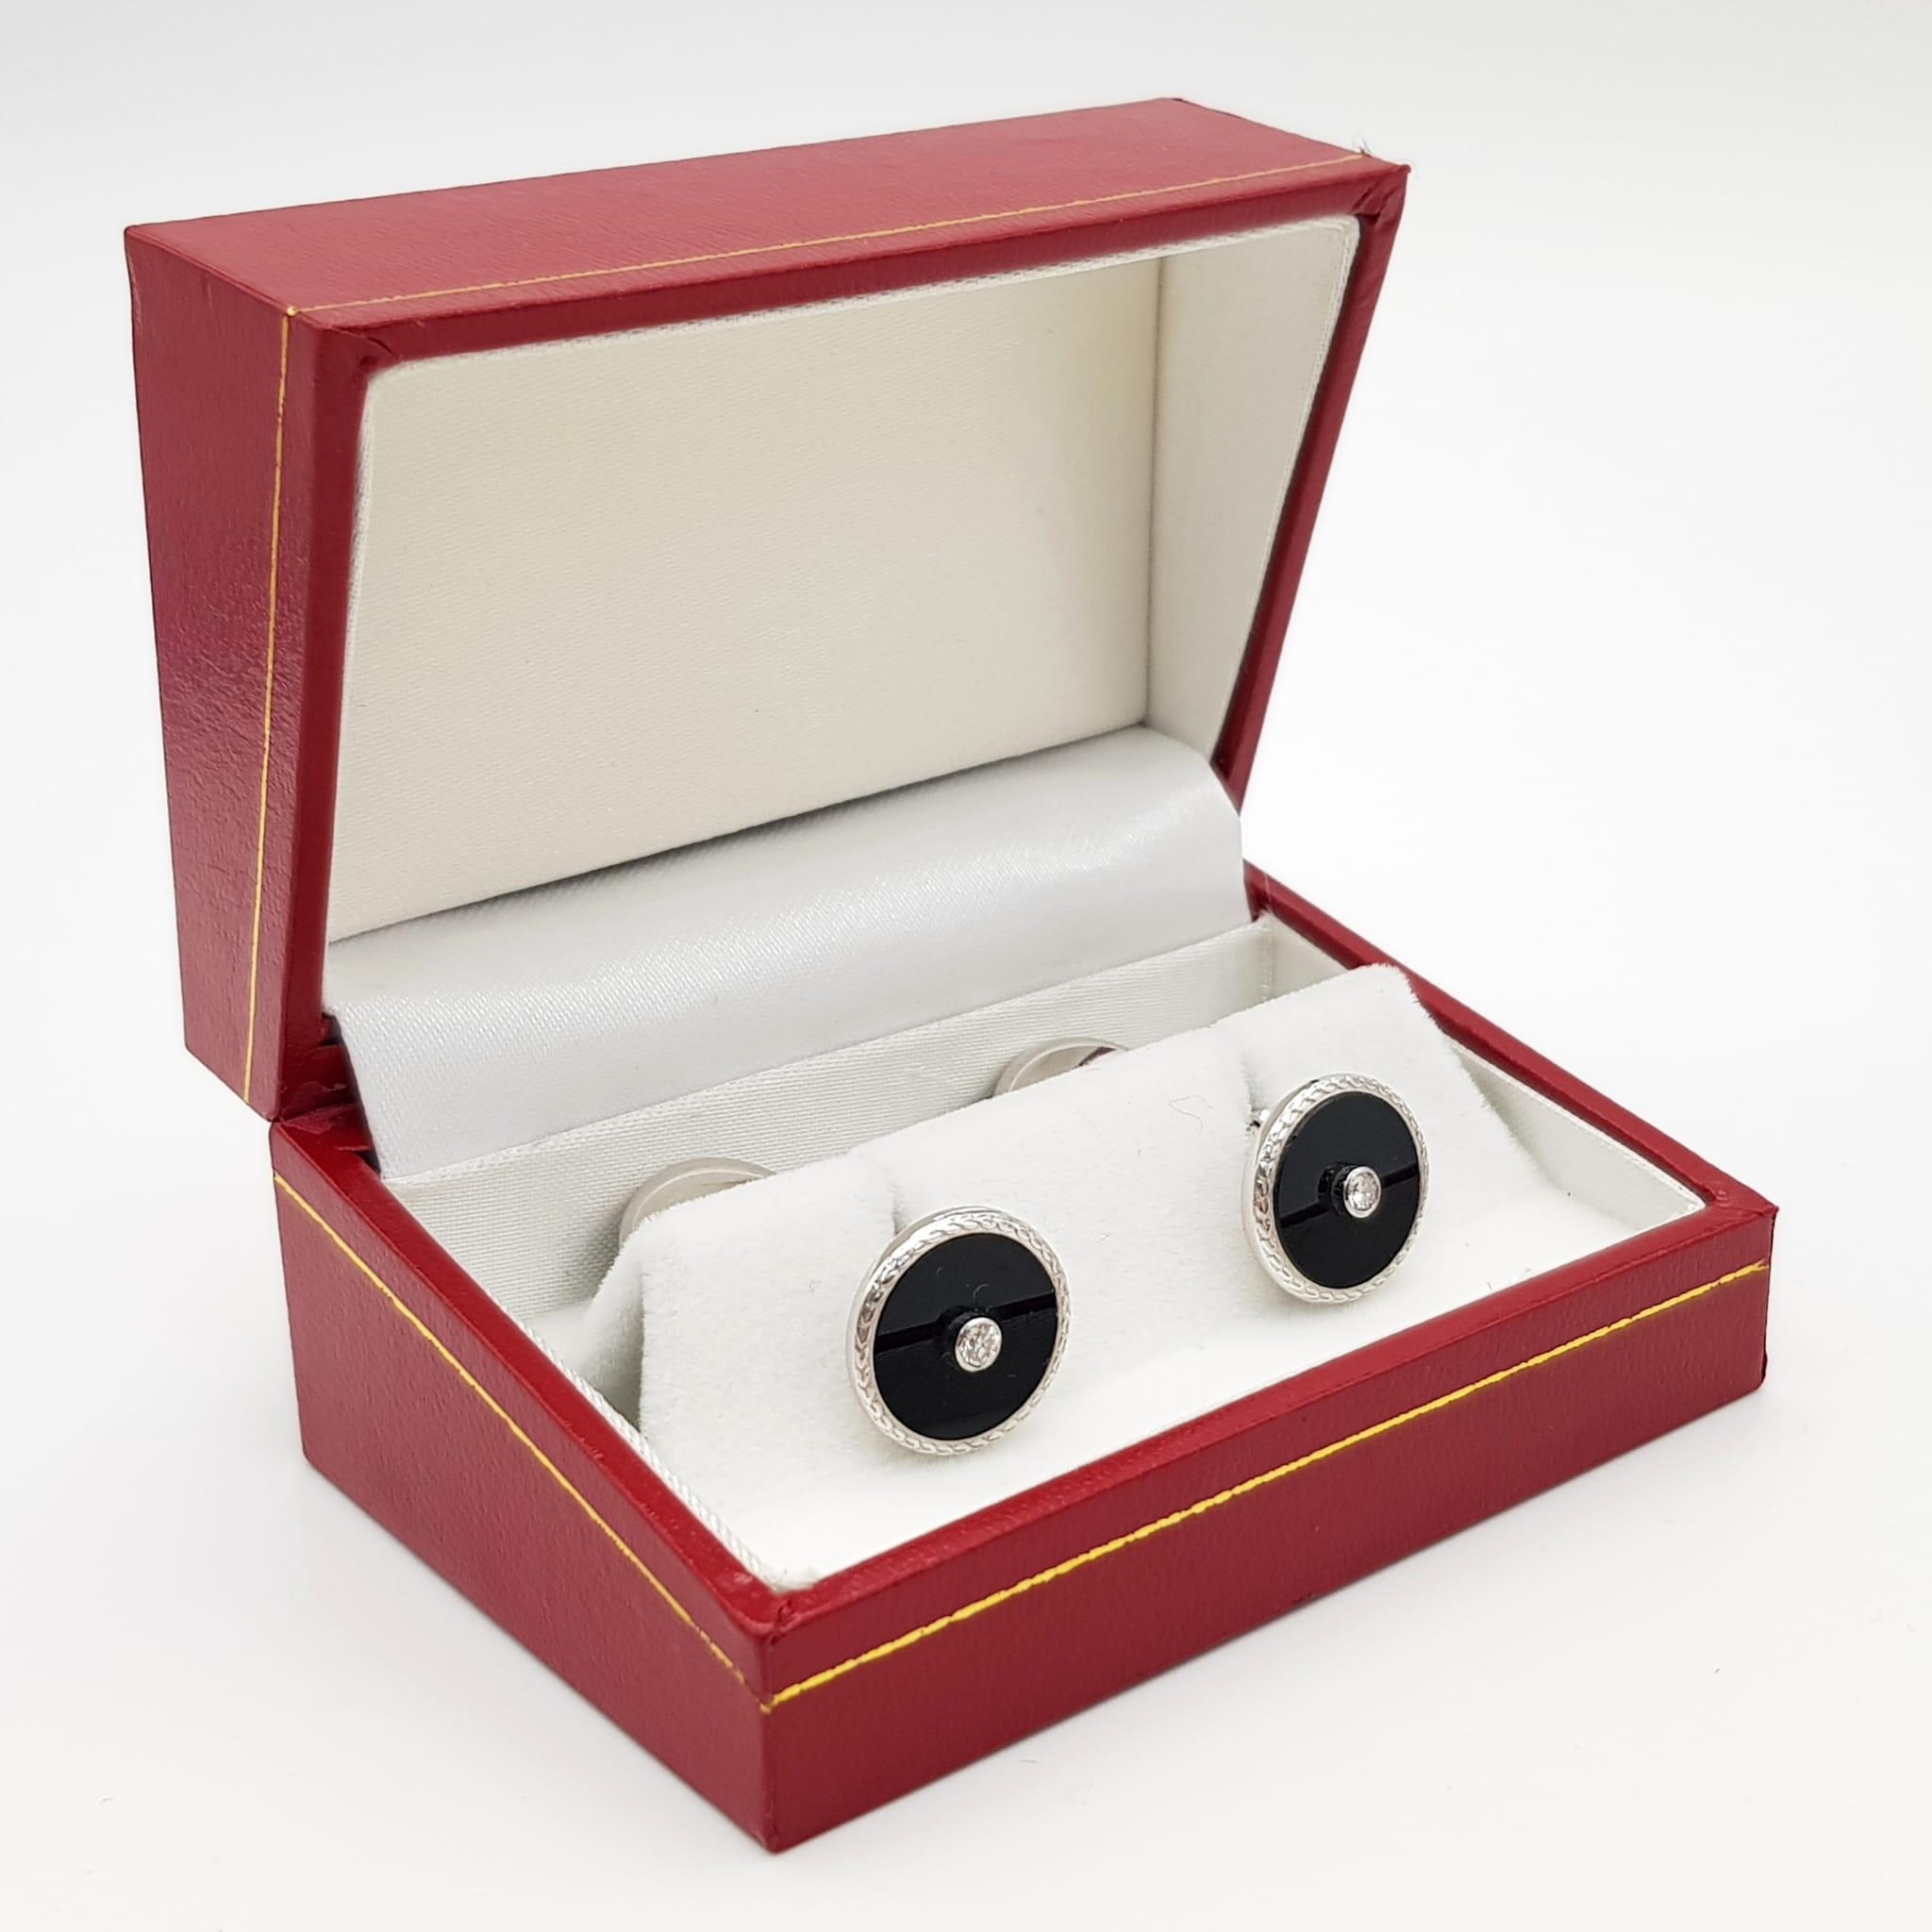 A Pair of Edwardian 18K White Gold Diamond and Onyx Cufflinks. Makers mark of Deakin and Francis.